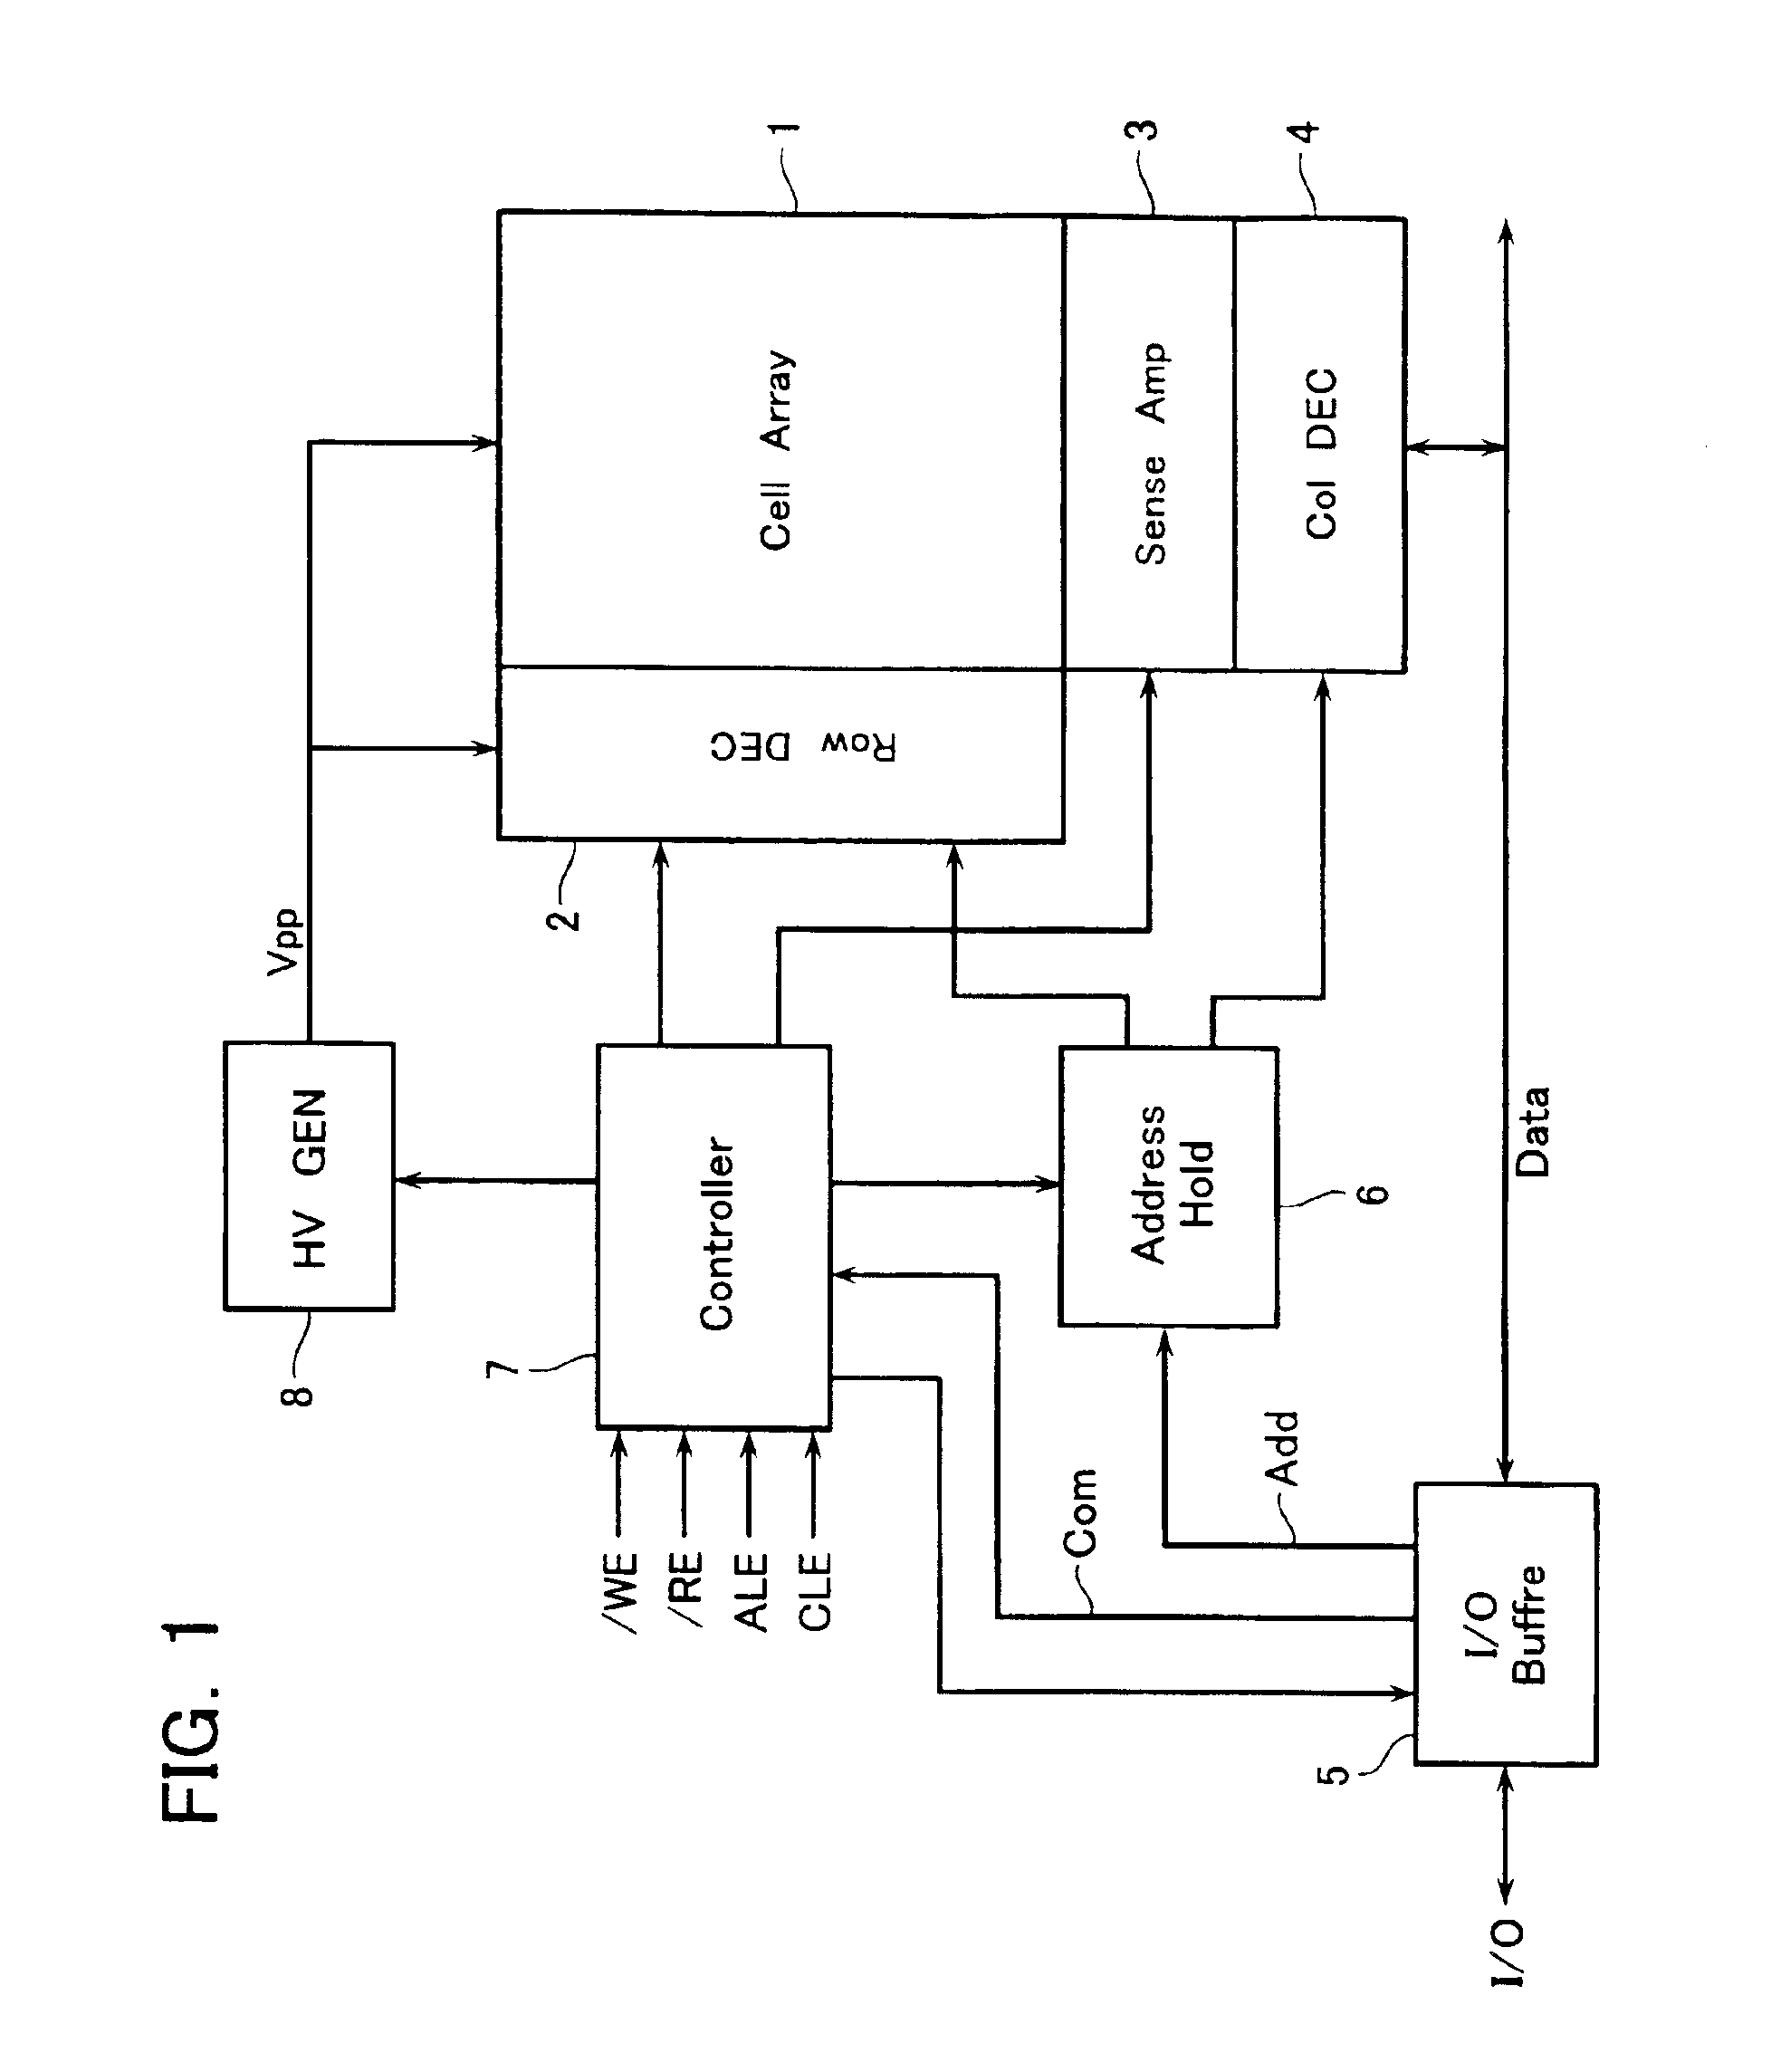 Non-volatile semiconductor memory device and electric device with the same